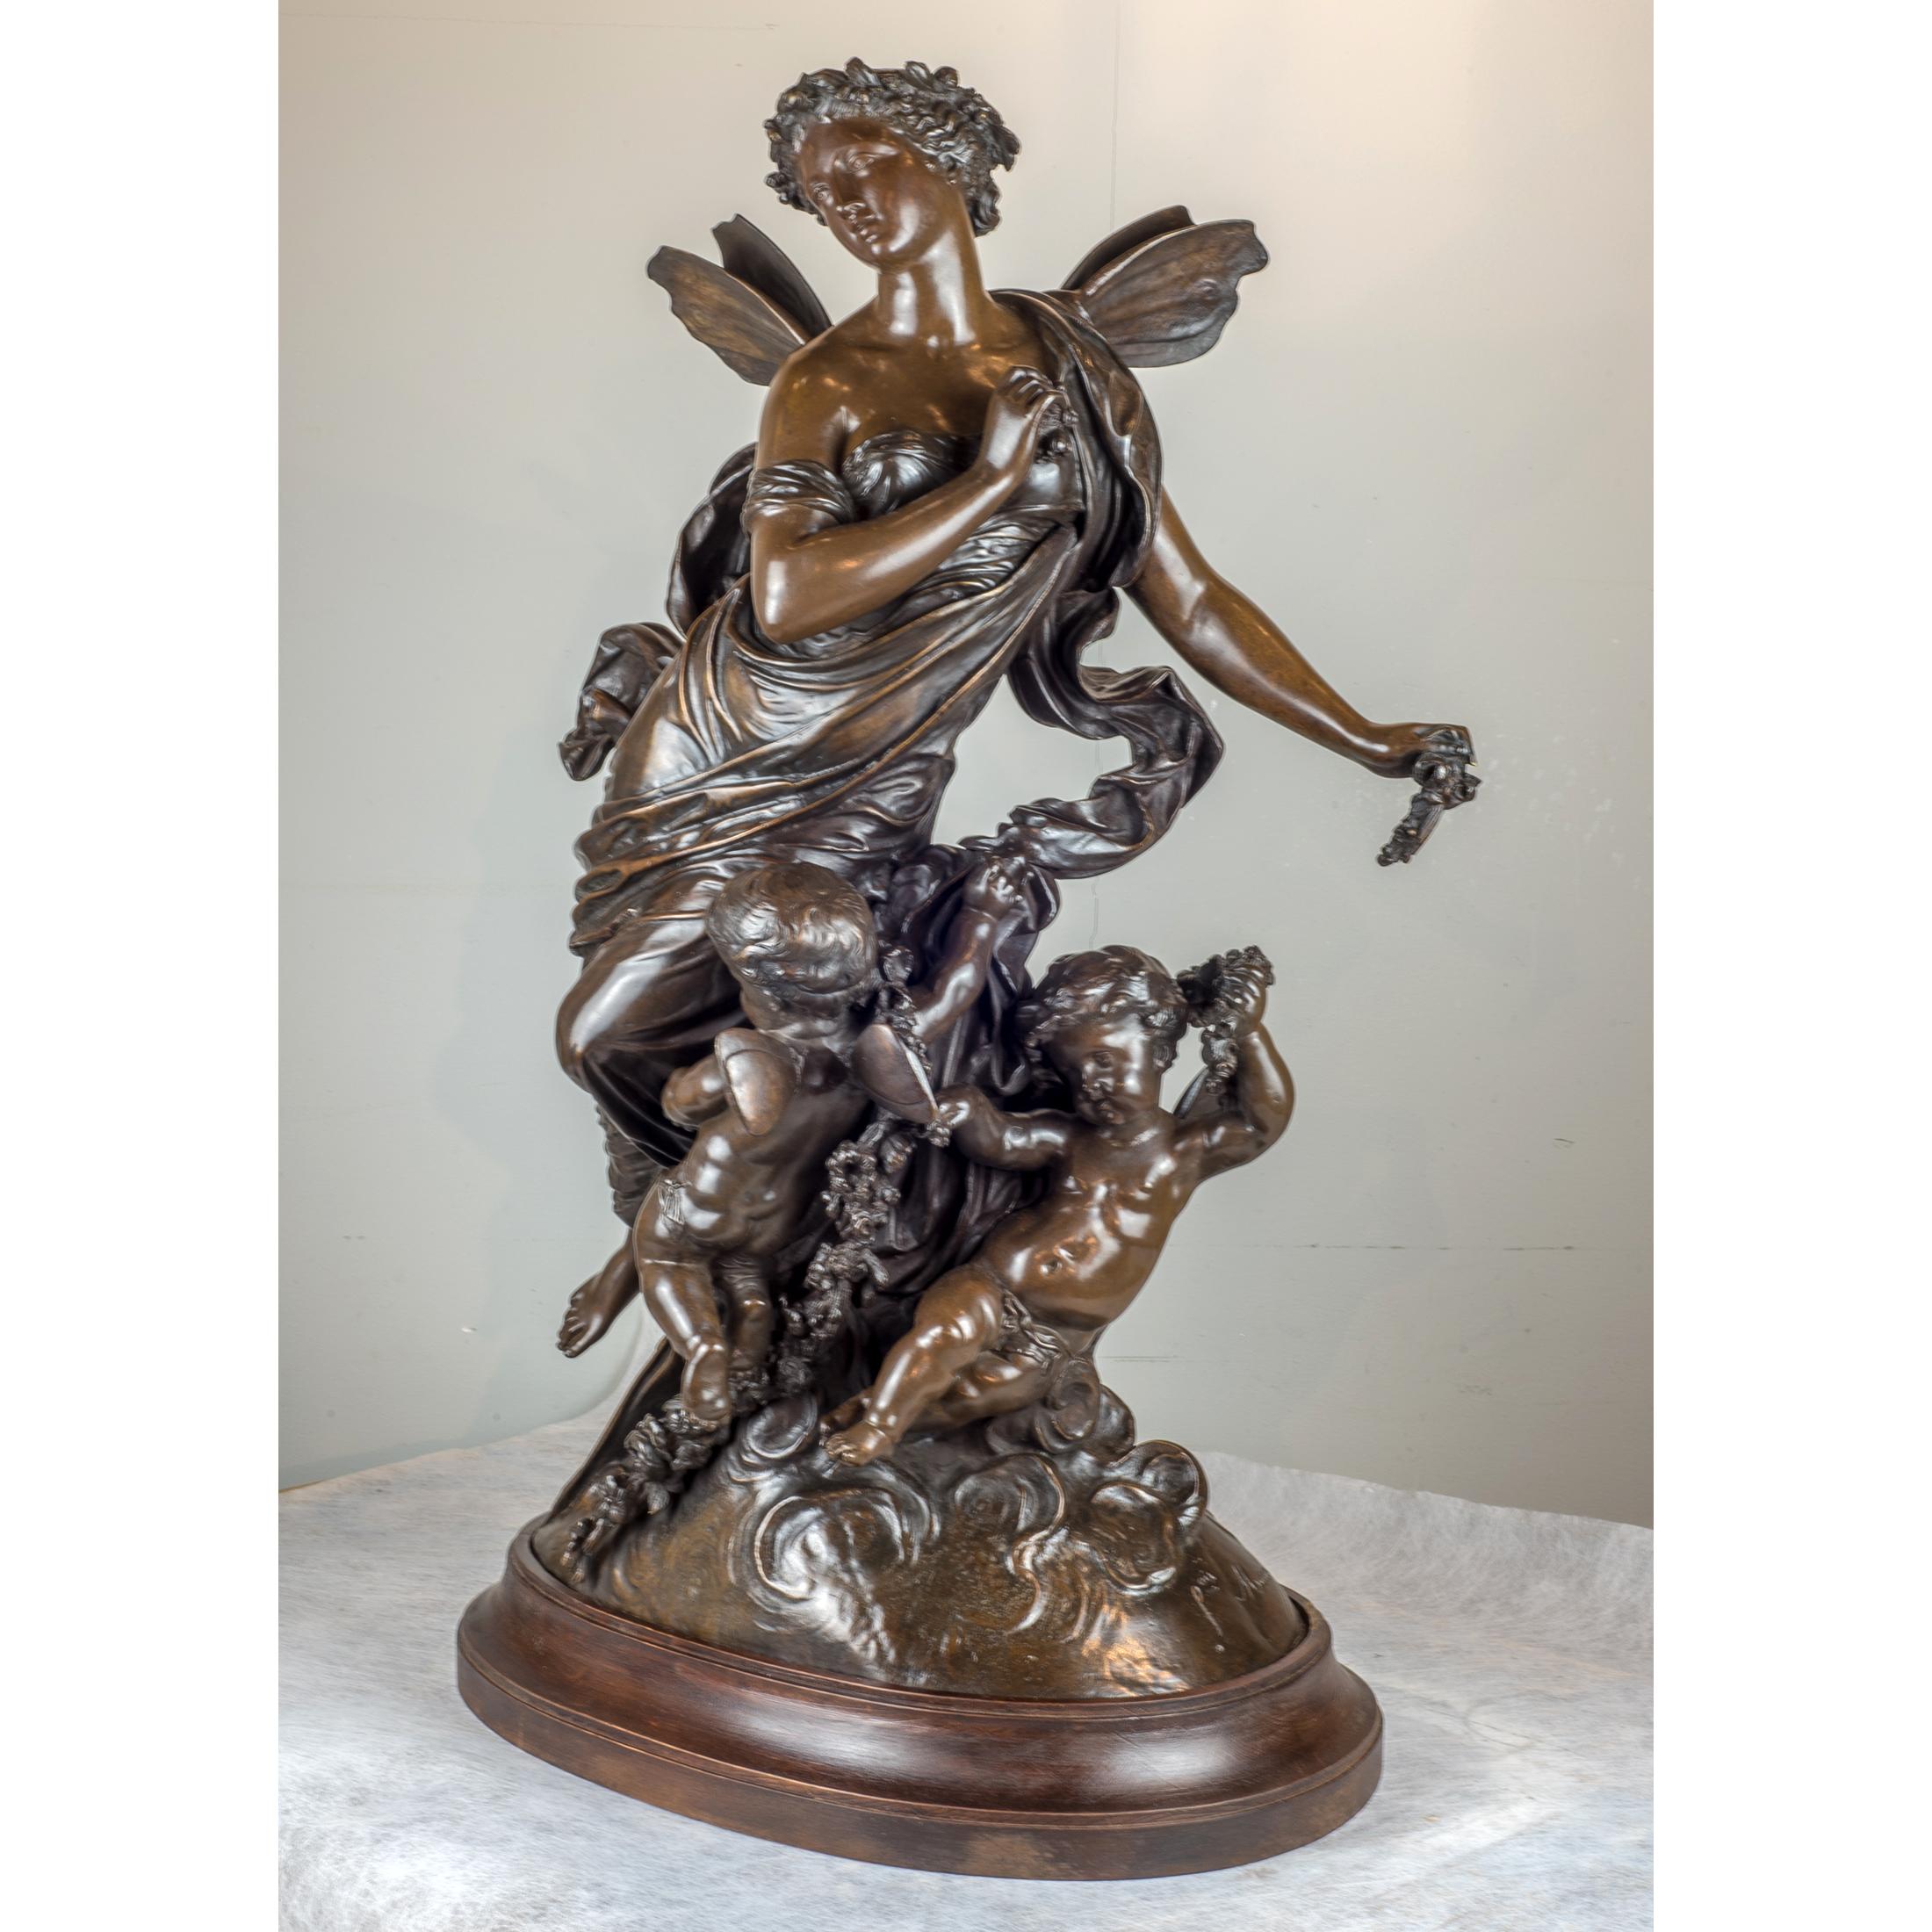 French Patinated Bronze Figural Group on Bronze by Moreau - Sculpture by Mathurin Moreau